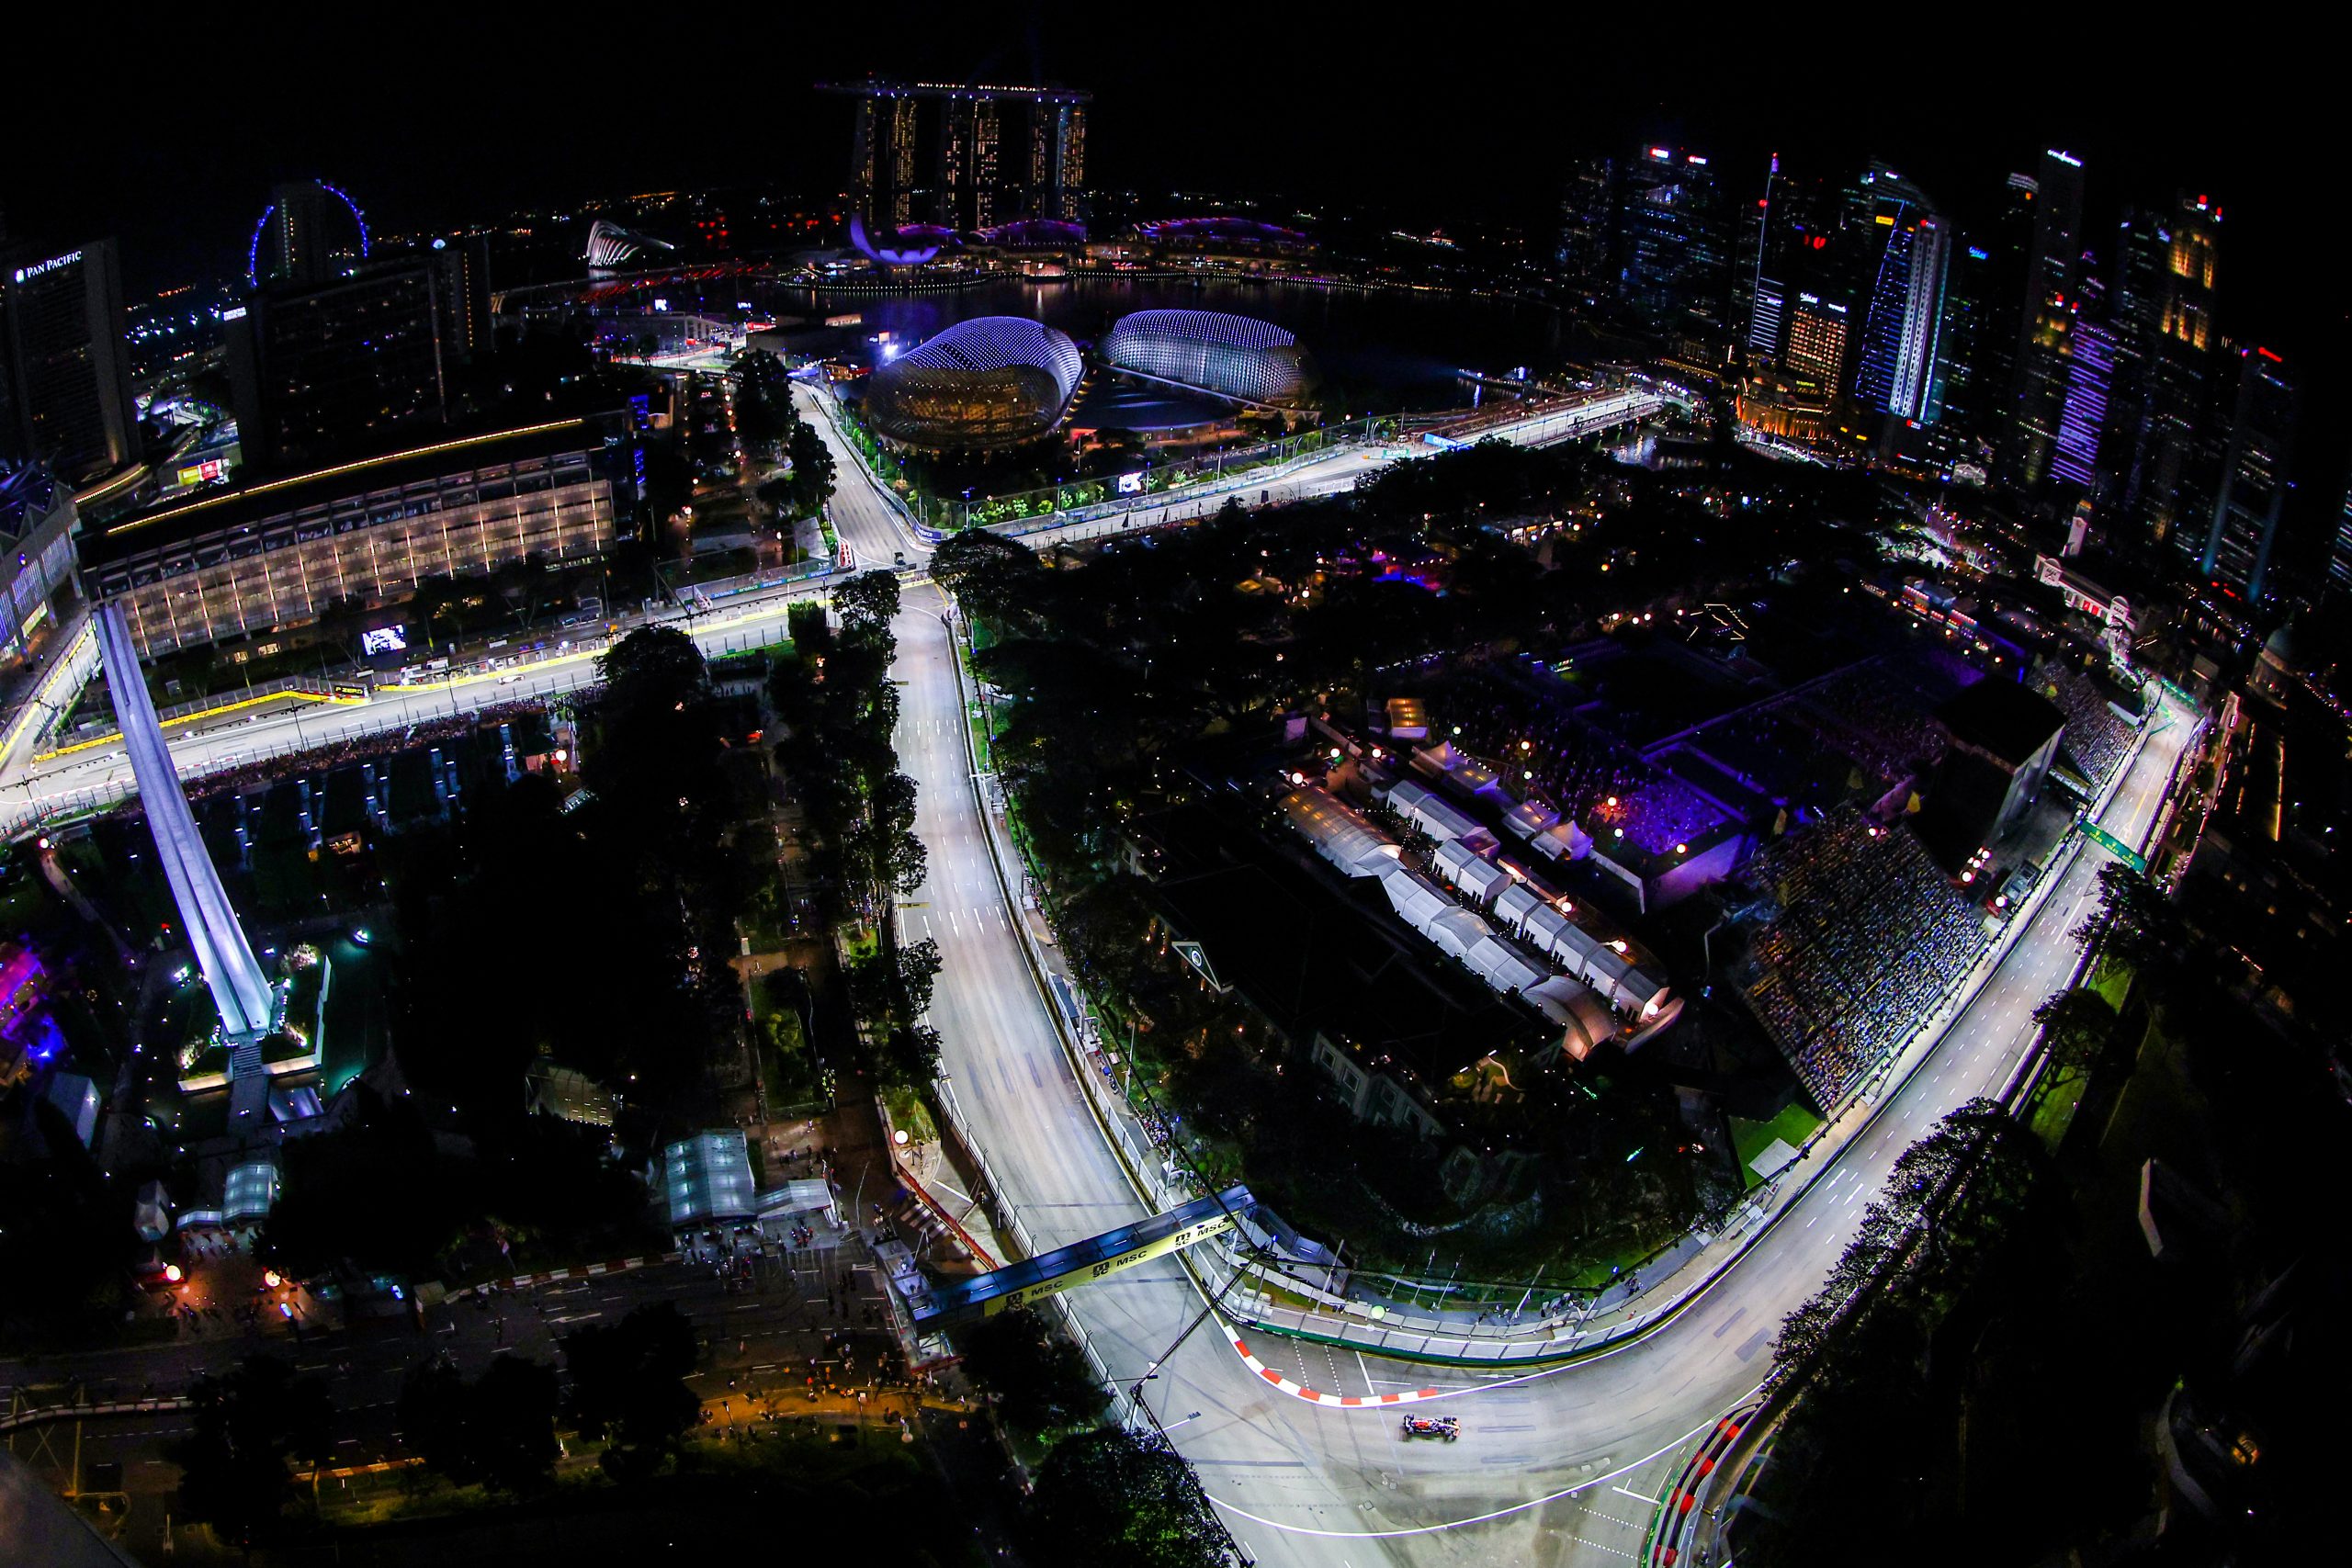 The overview of the Marina Bay street circuit, Singapore Grand Prix